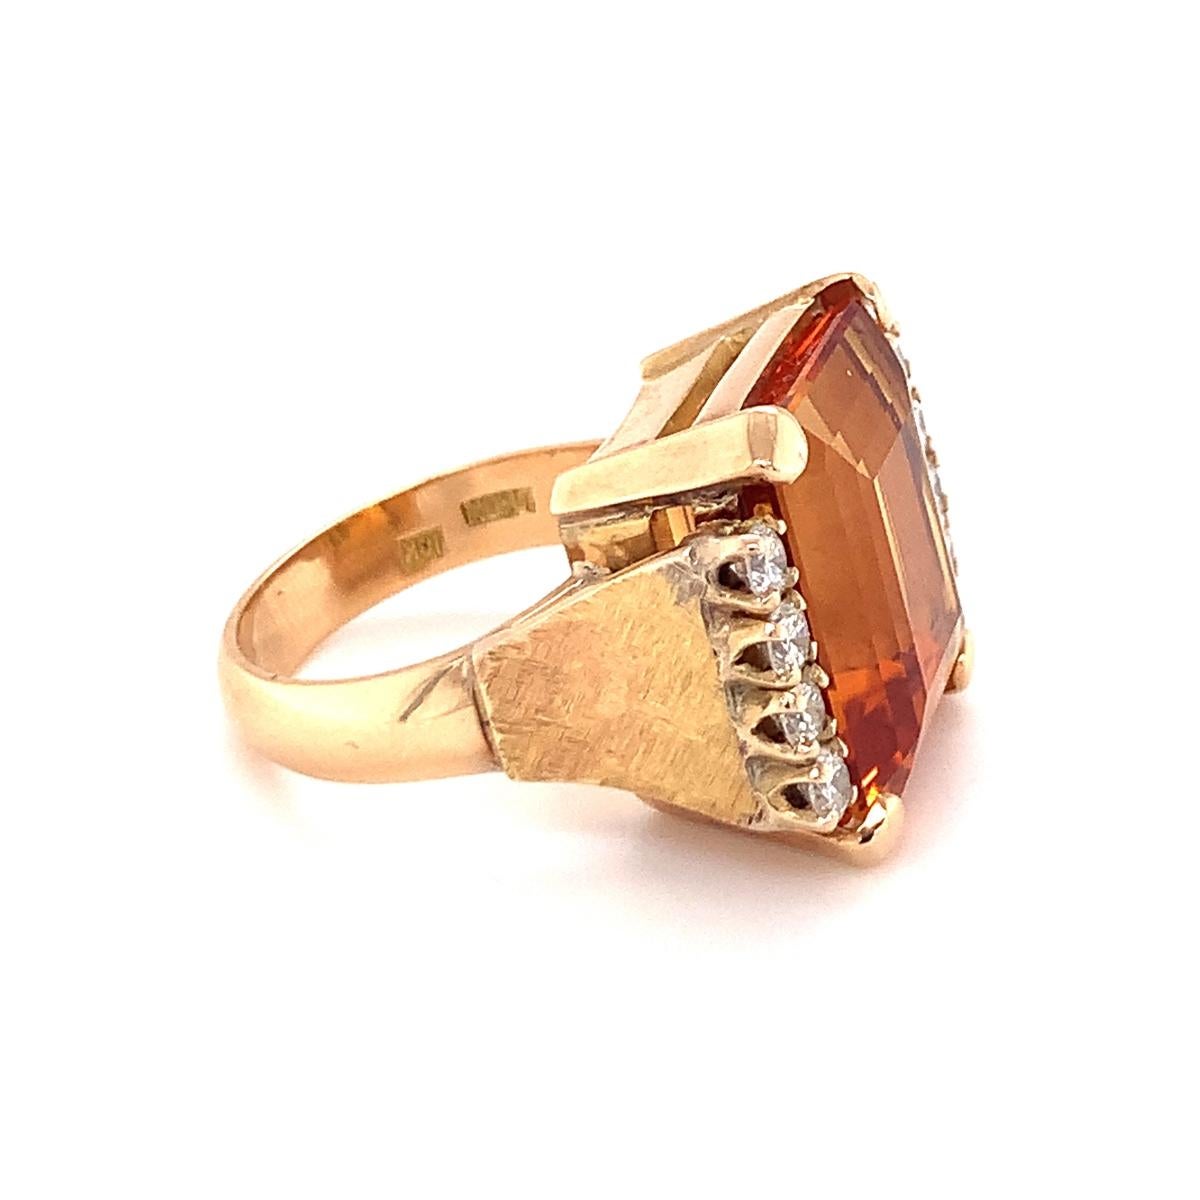 Citrine and Diamond Ring in 18K Yellow Gold, circa 1960s For Sale 3